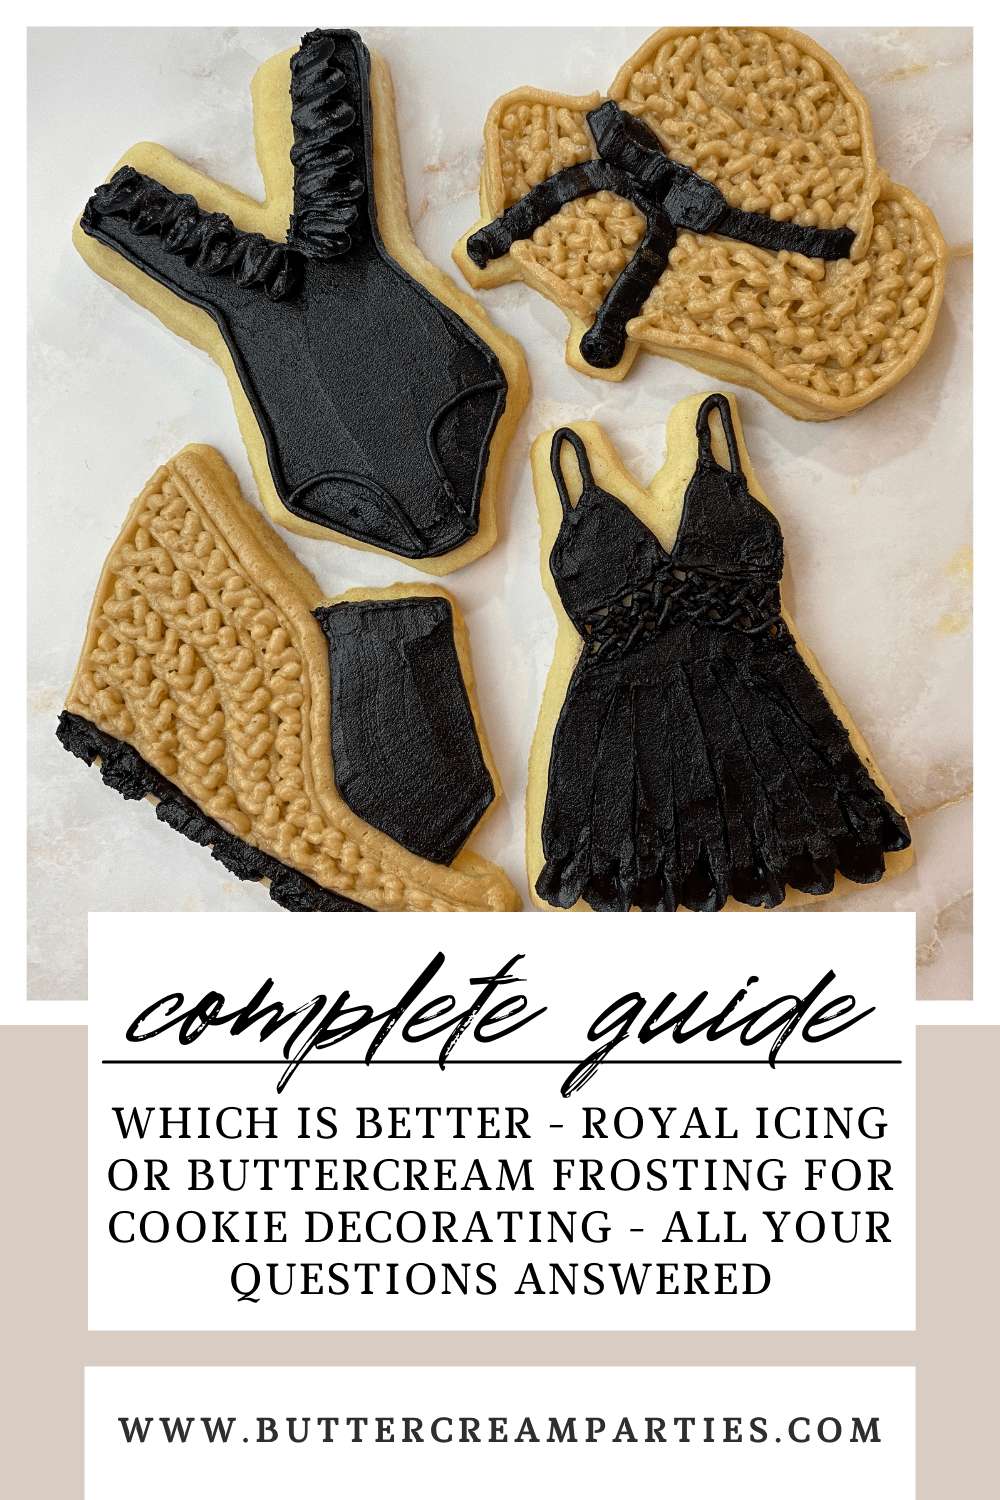 Which is better, royal icing versus buttercream frosting for cookie decorating